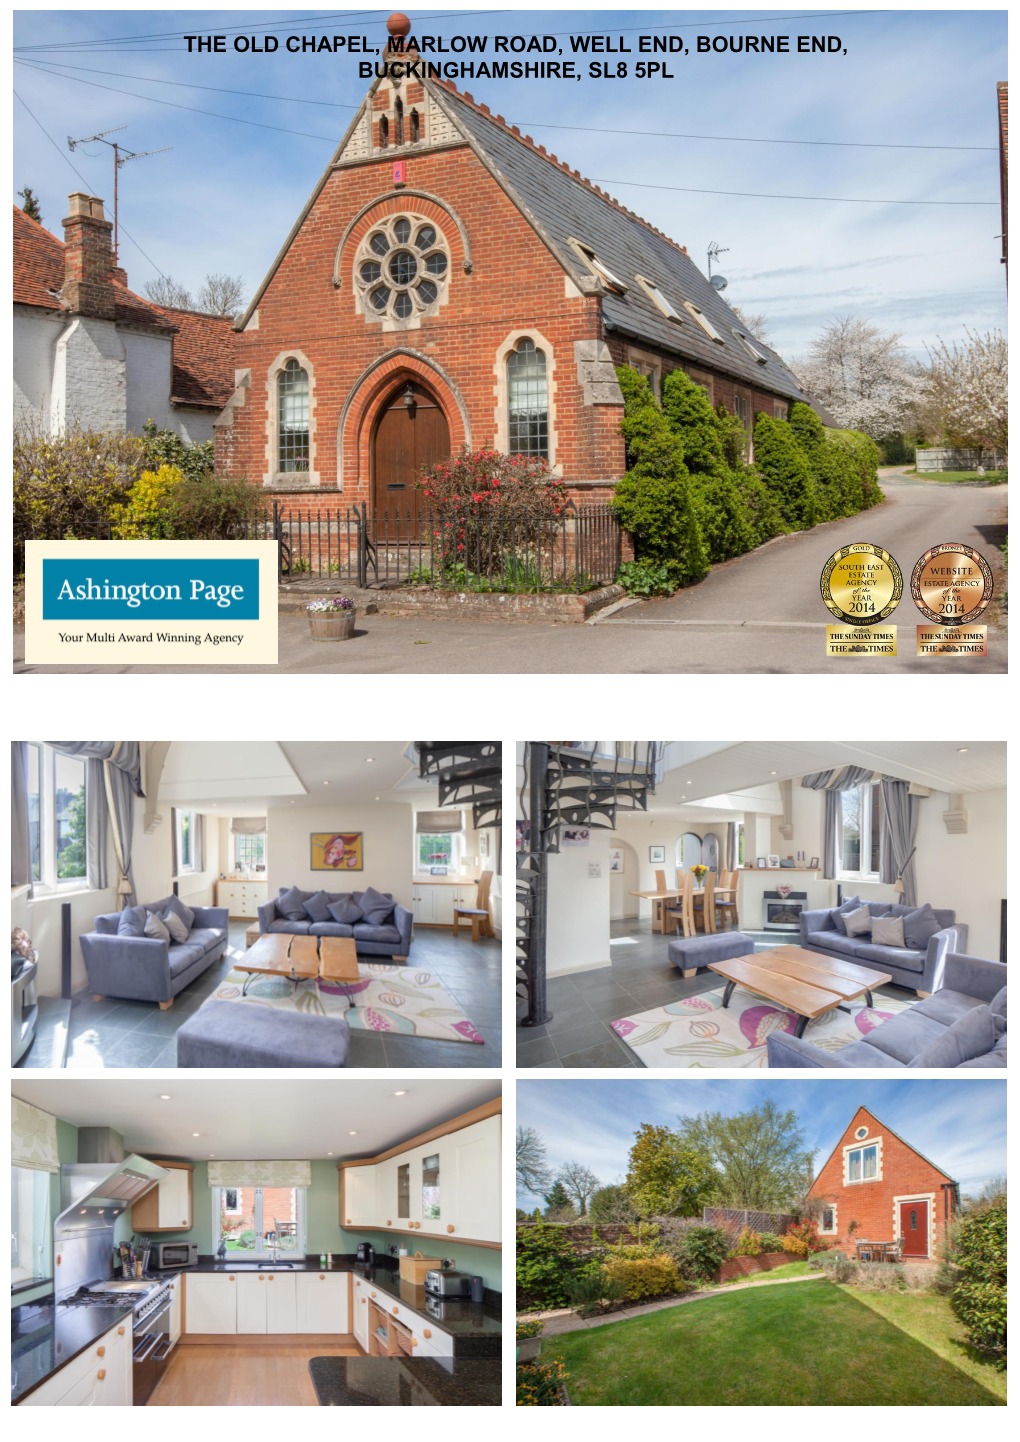 The Old Chapel, Marlow Road, Well End, Bourne End, Buckinghamshire, Sl8 5Pl